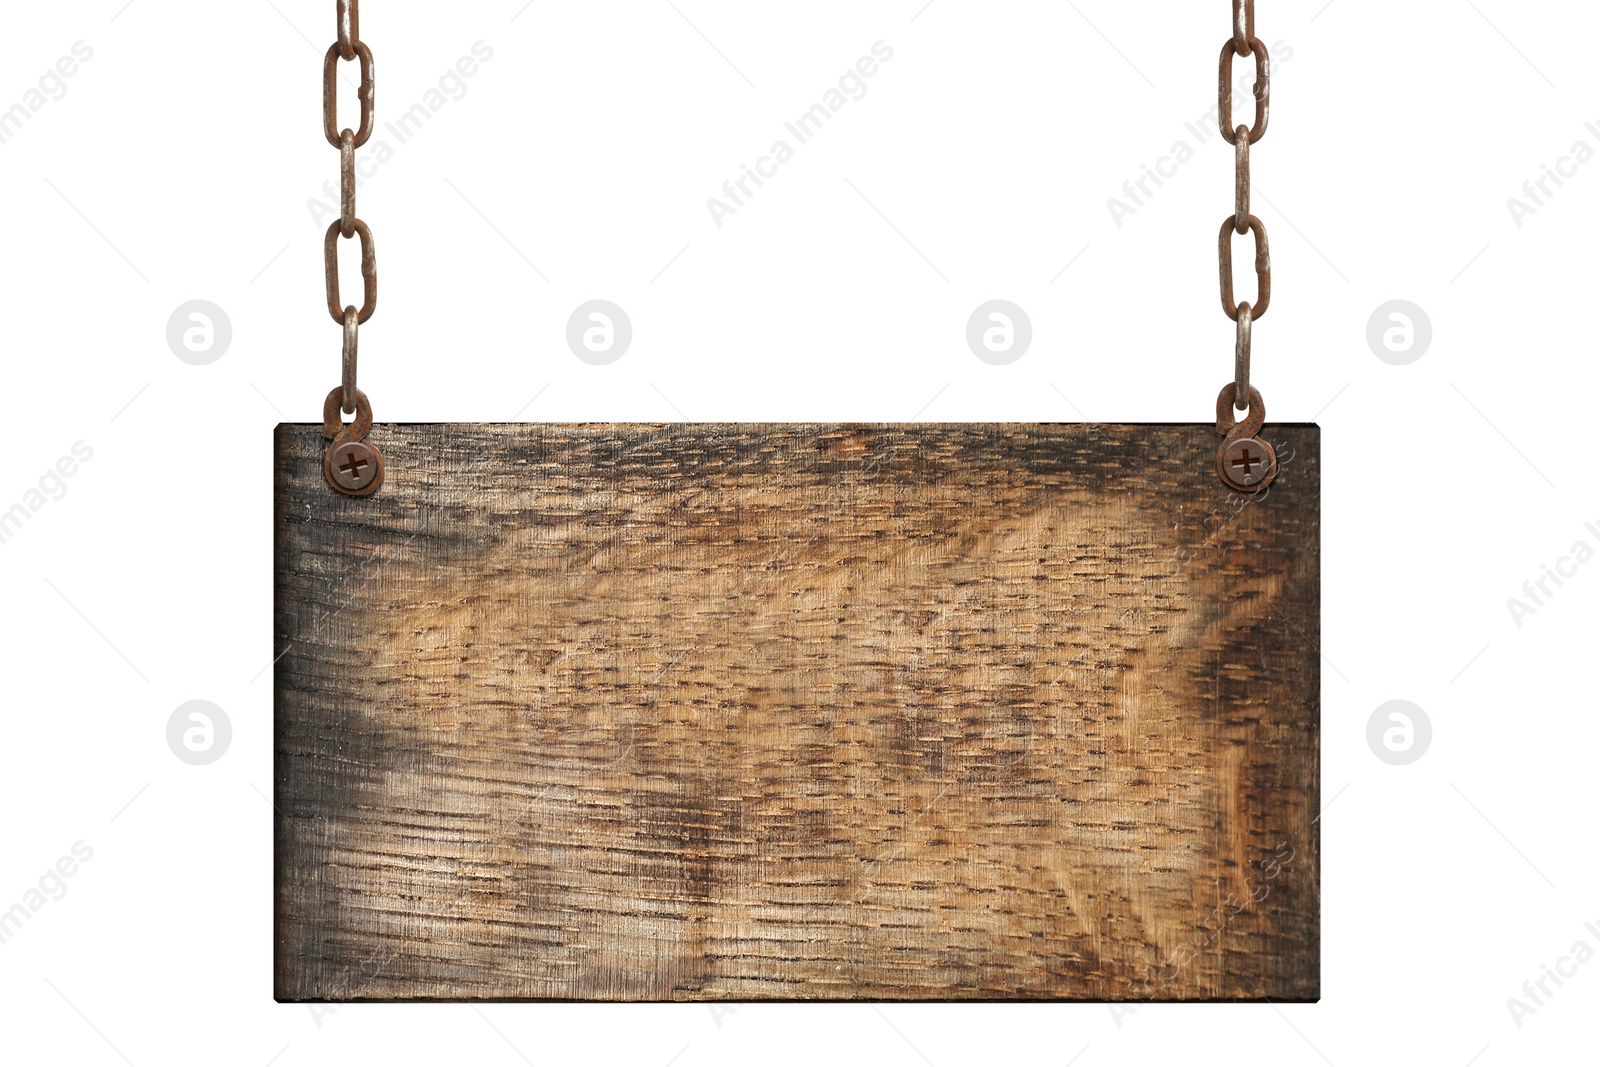 Image of One wooden signboard hanging on metal chain against white background. Space for text